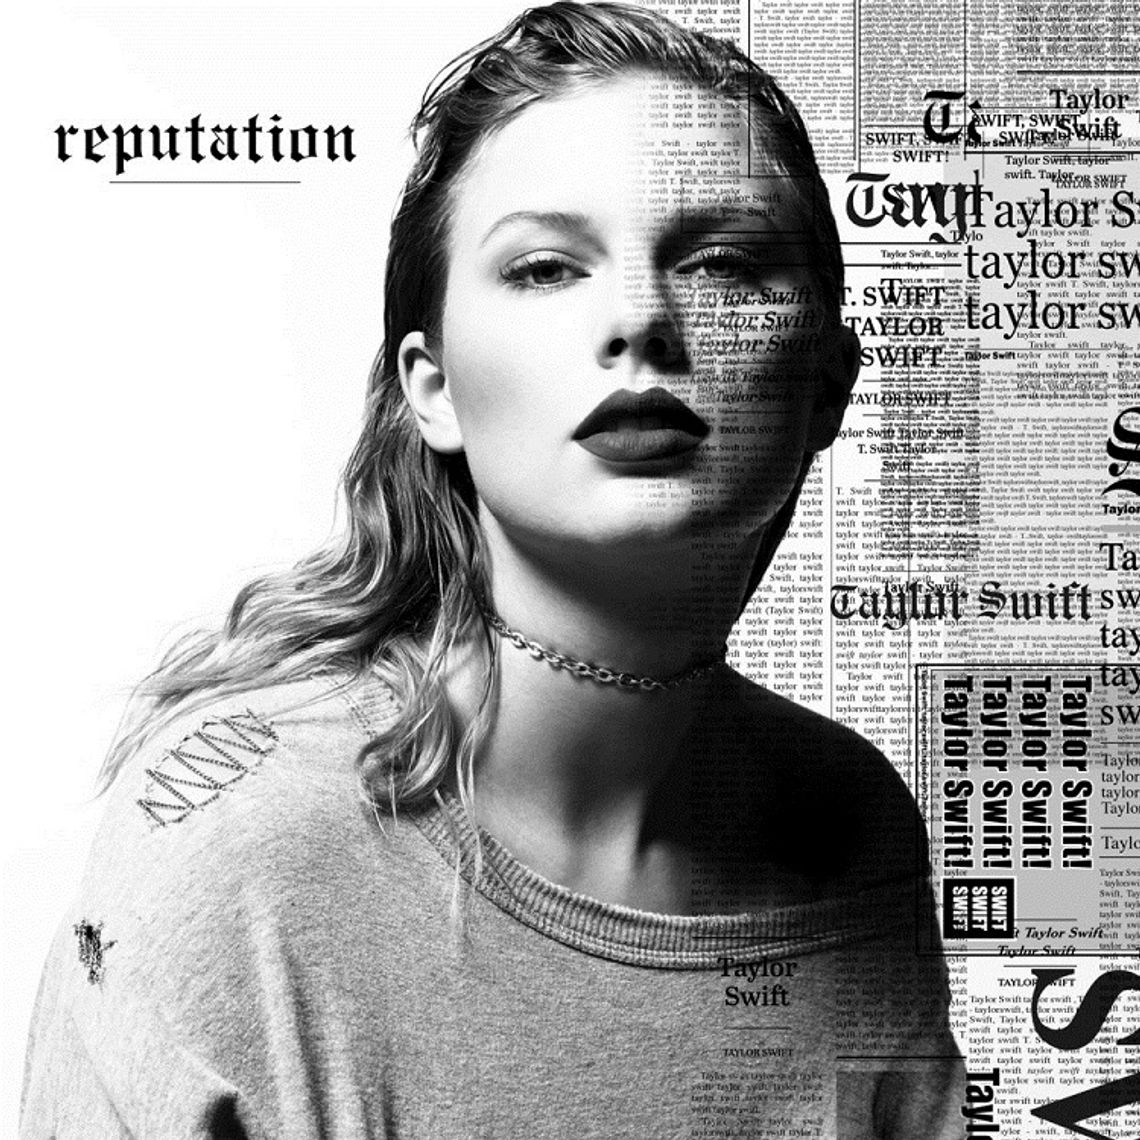 Taylor Swift "Ready for it"